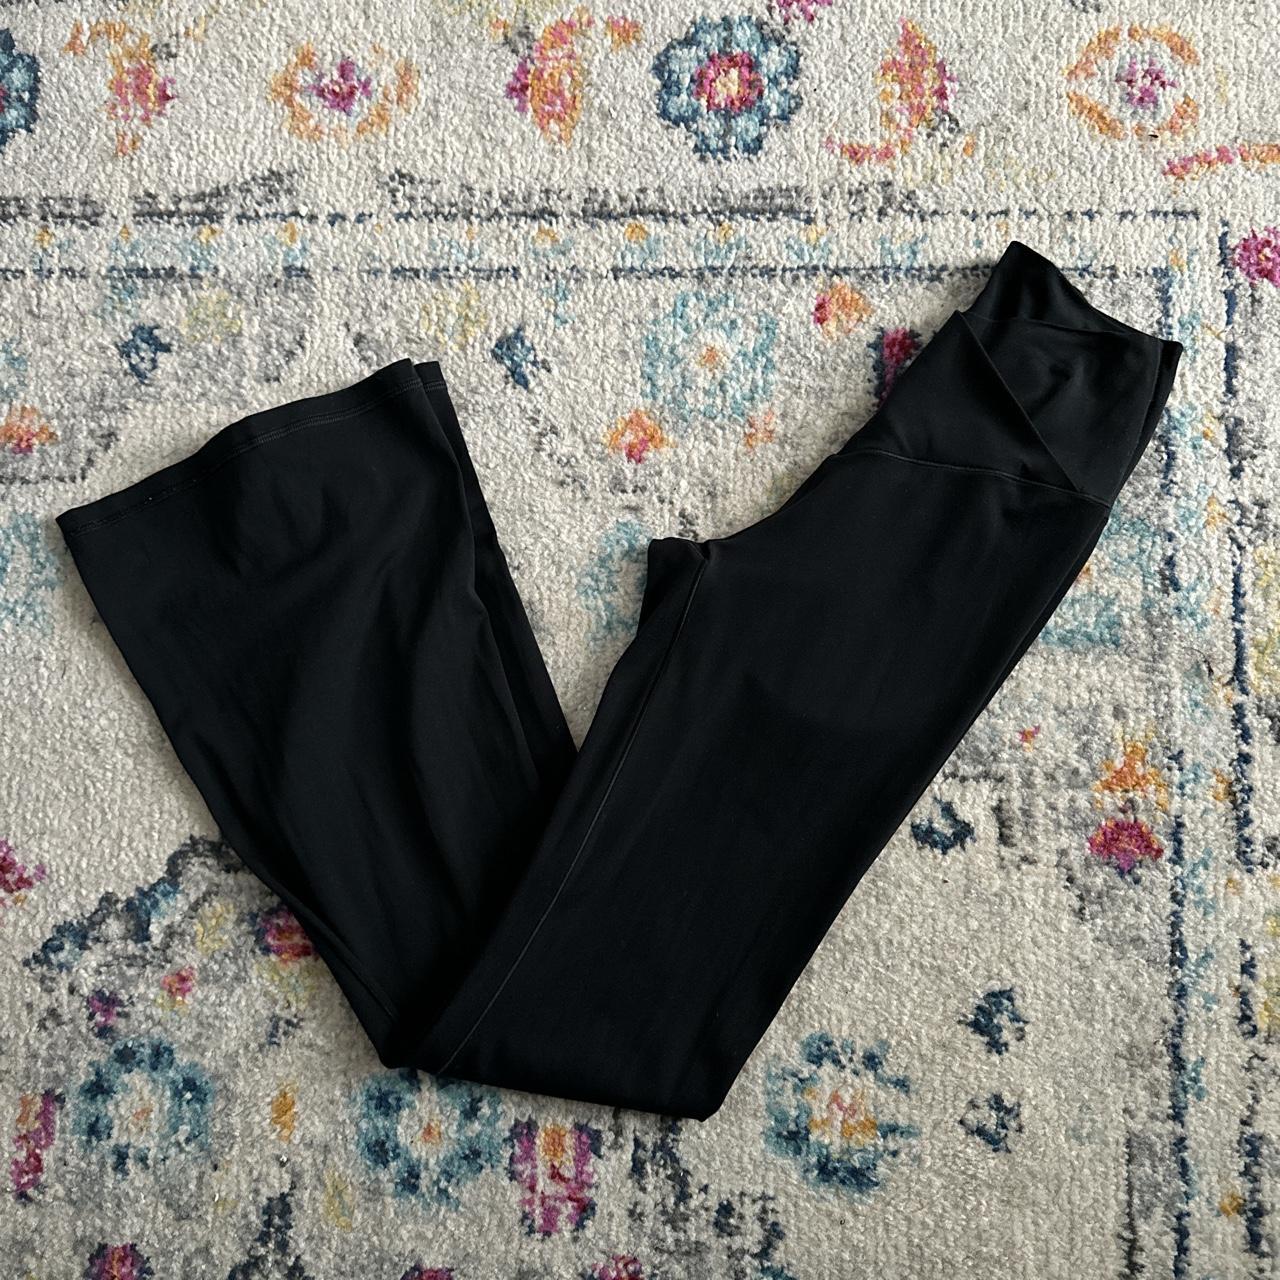 Aerie ruched waist flare leggings in size M forest - Depop